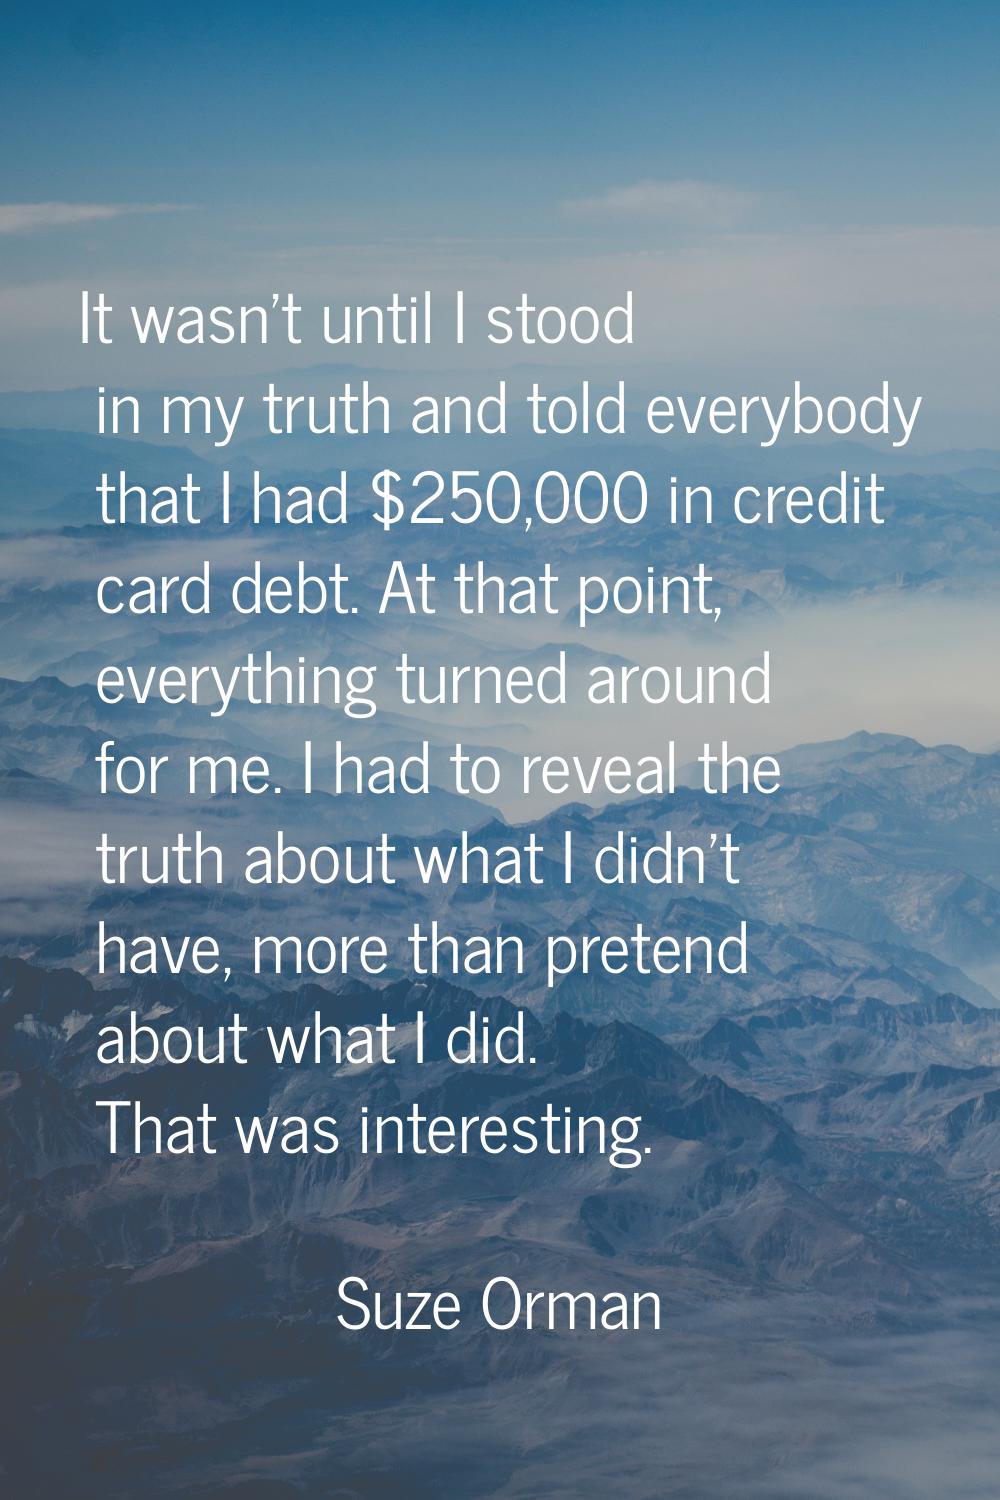 It wasn't until I stood in my truth and told everybody that I had $250,000 in credit card debt. At 